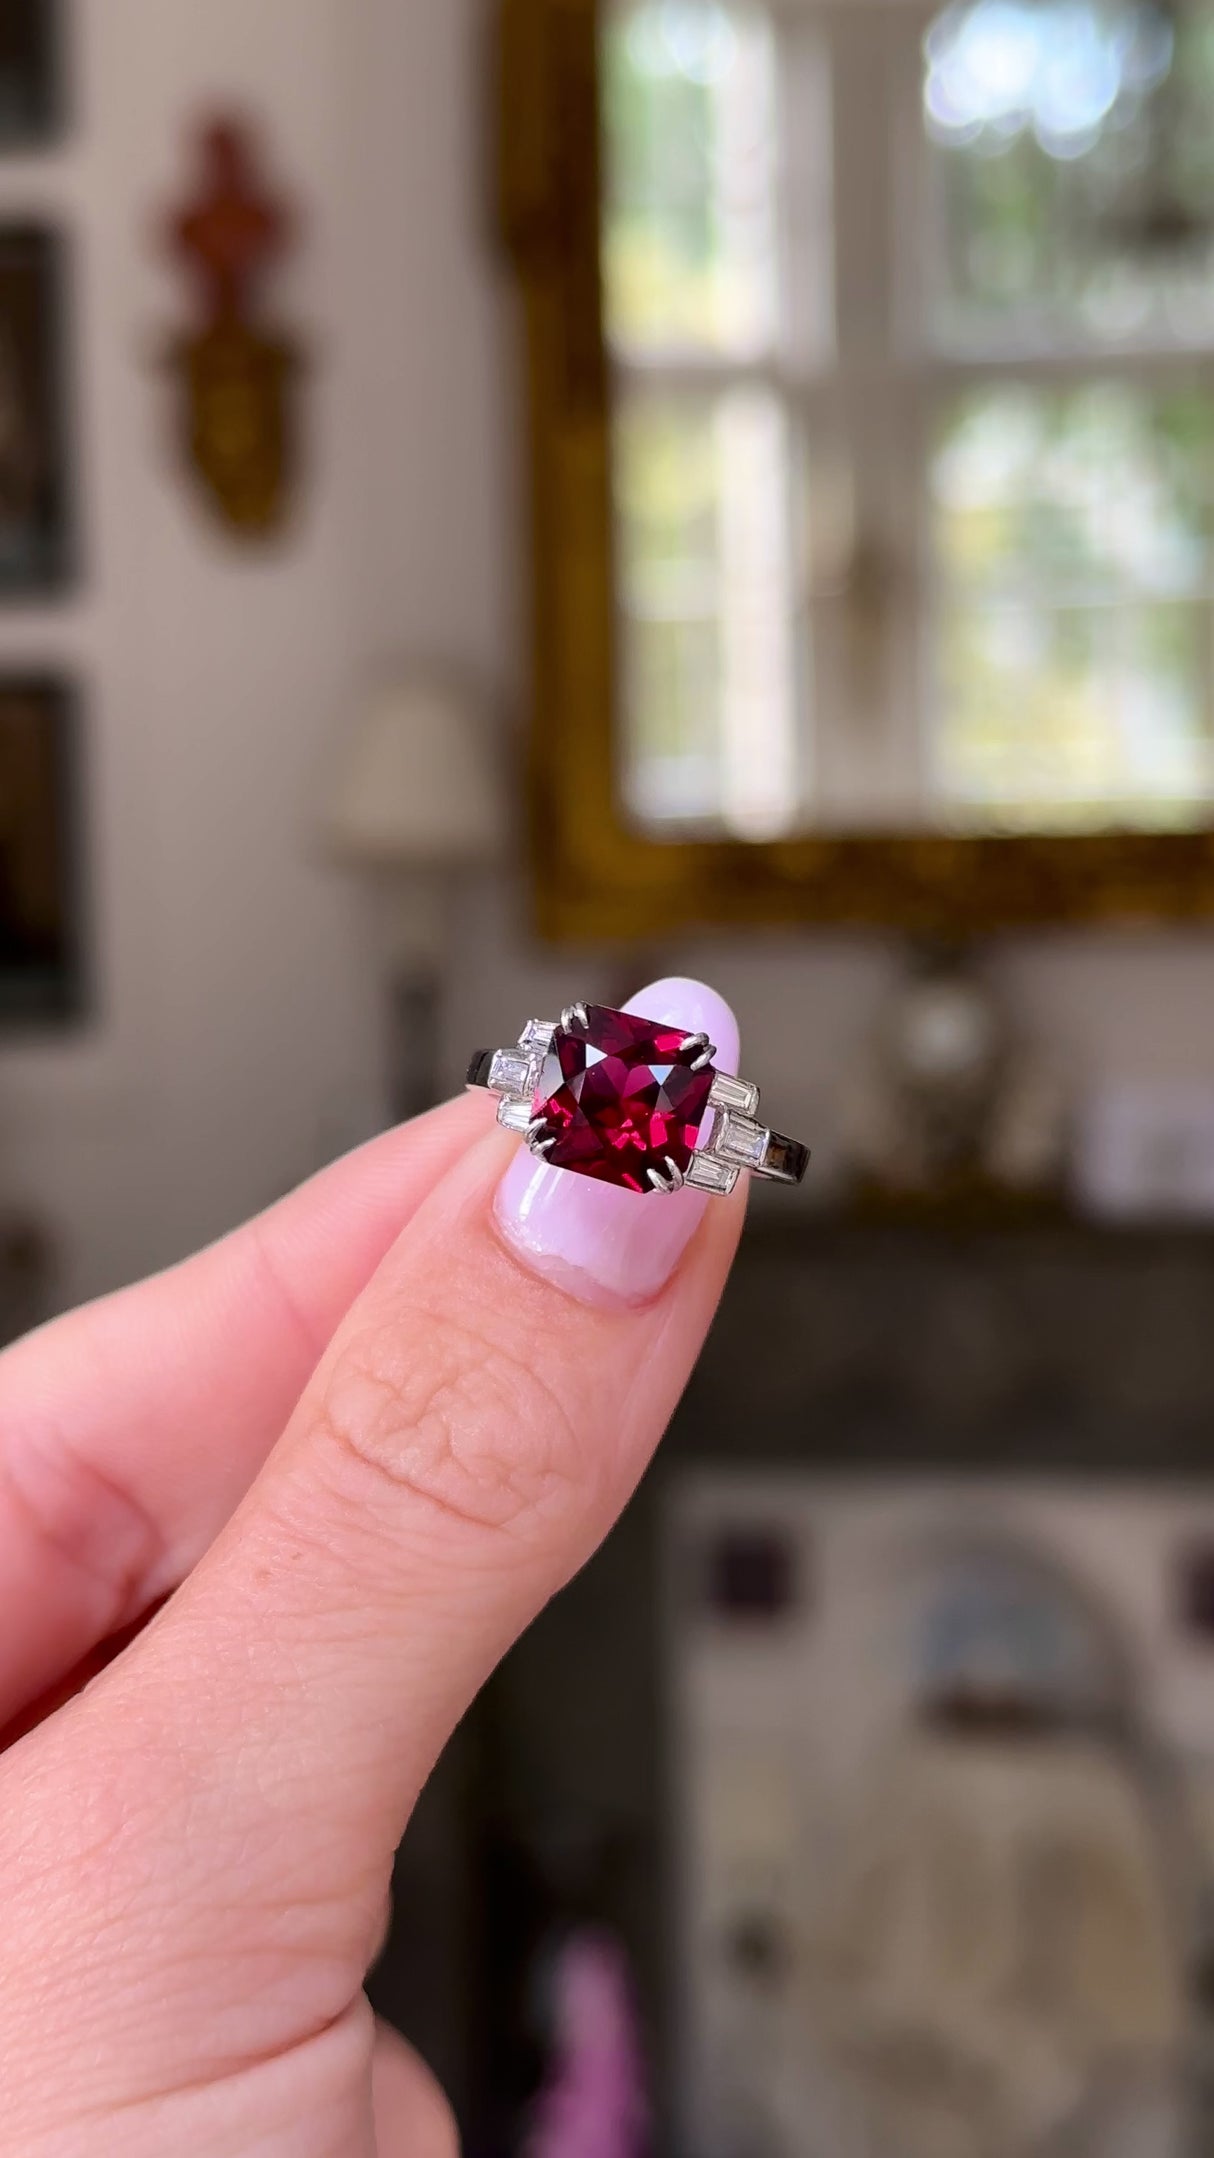 Vintage red garnet and diamond ring, held in fingers and moved around to give perspective.